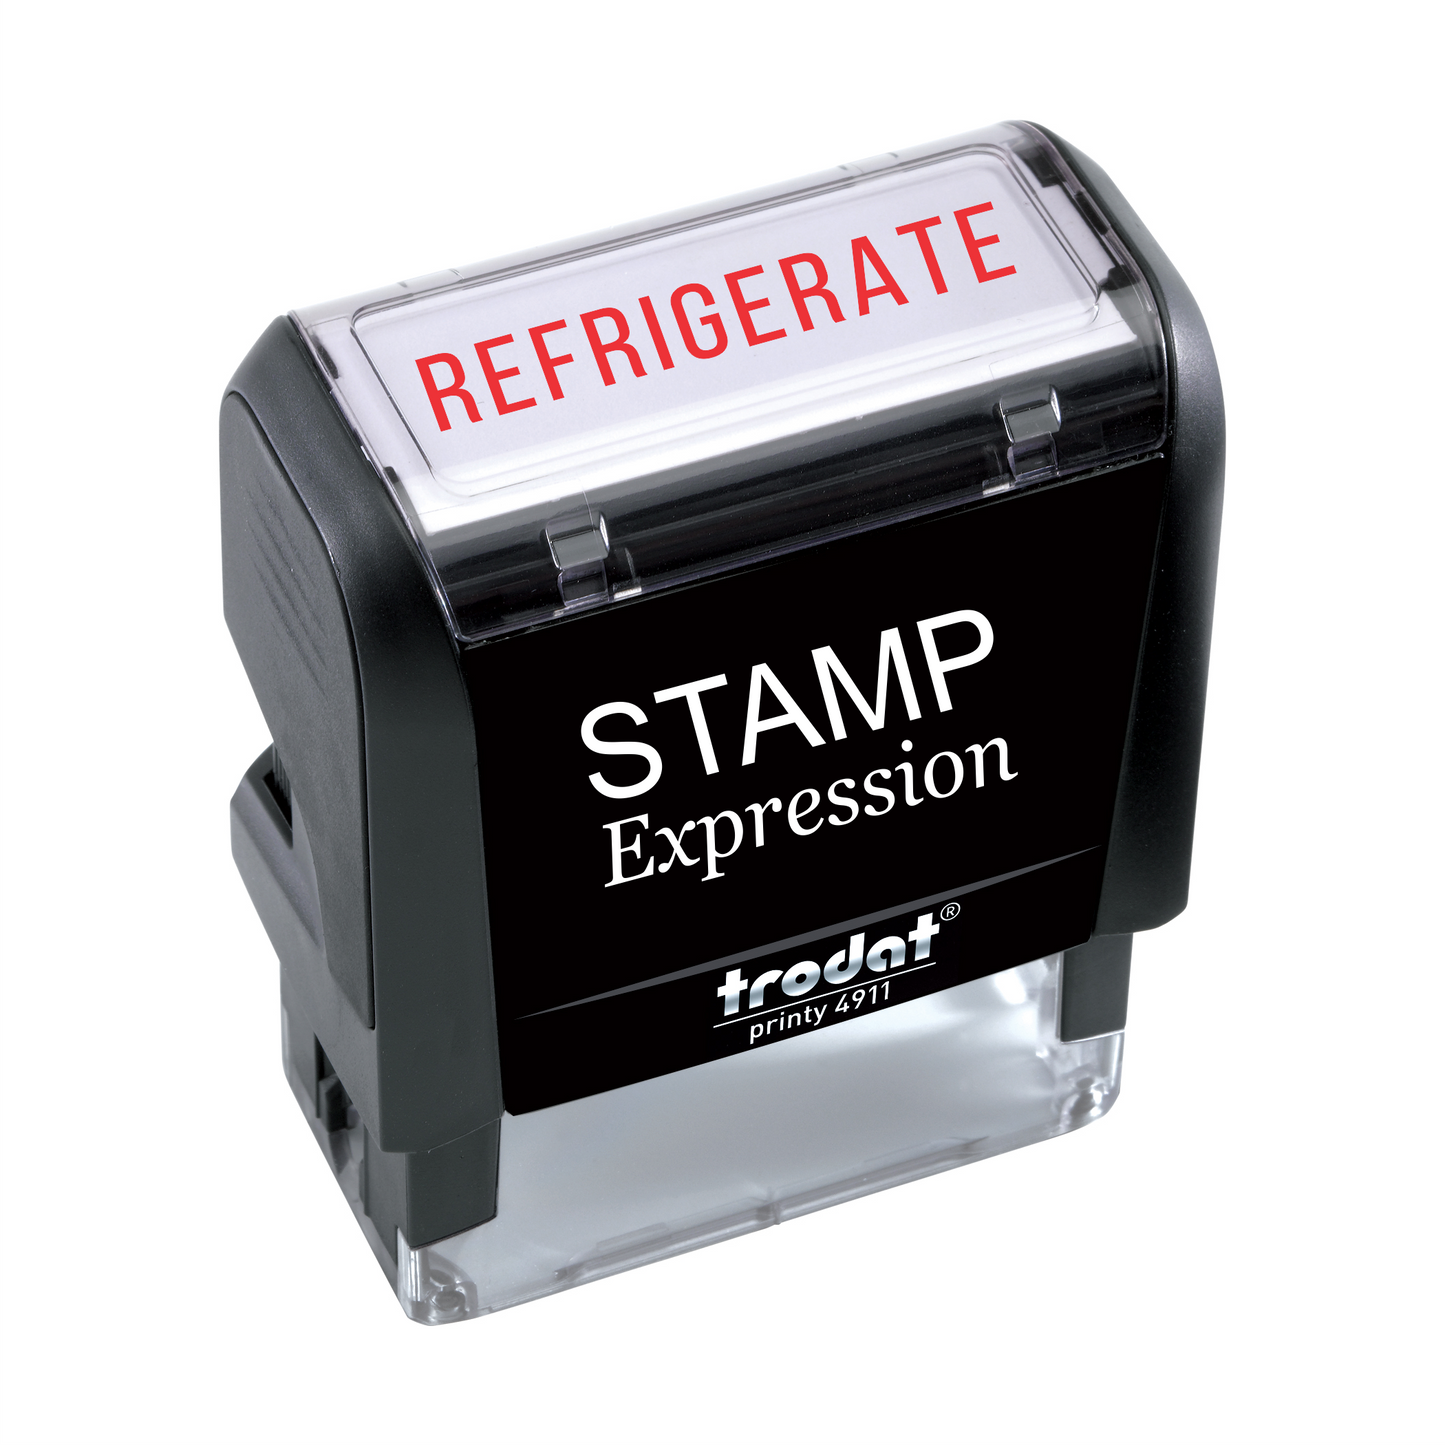 REFRIGERATE Office Self Inking Rubber Stamp (SH-5369)